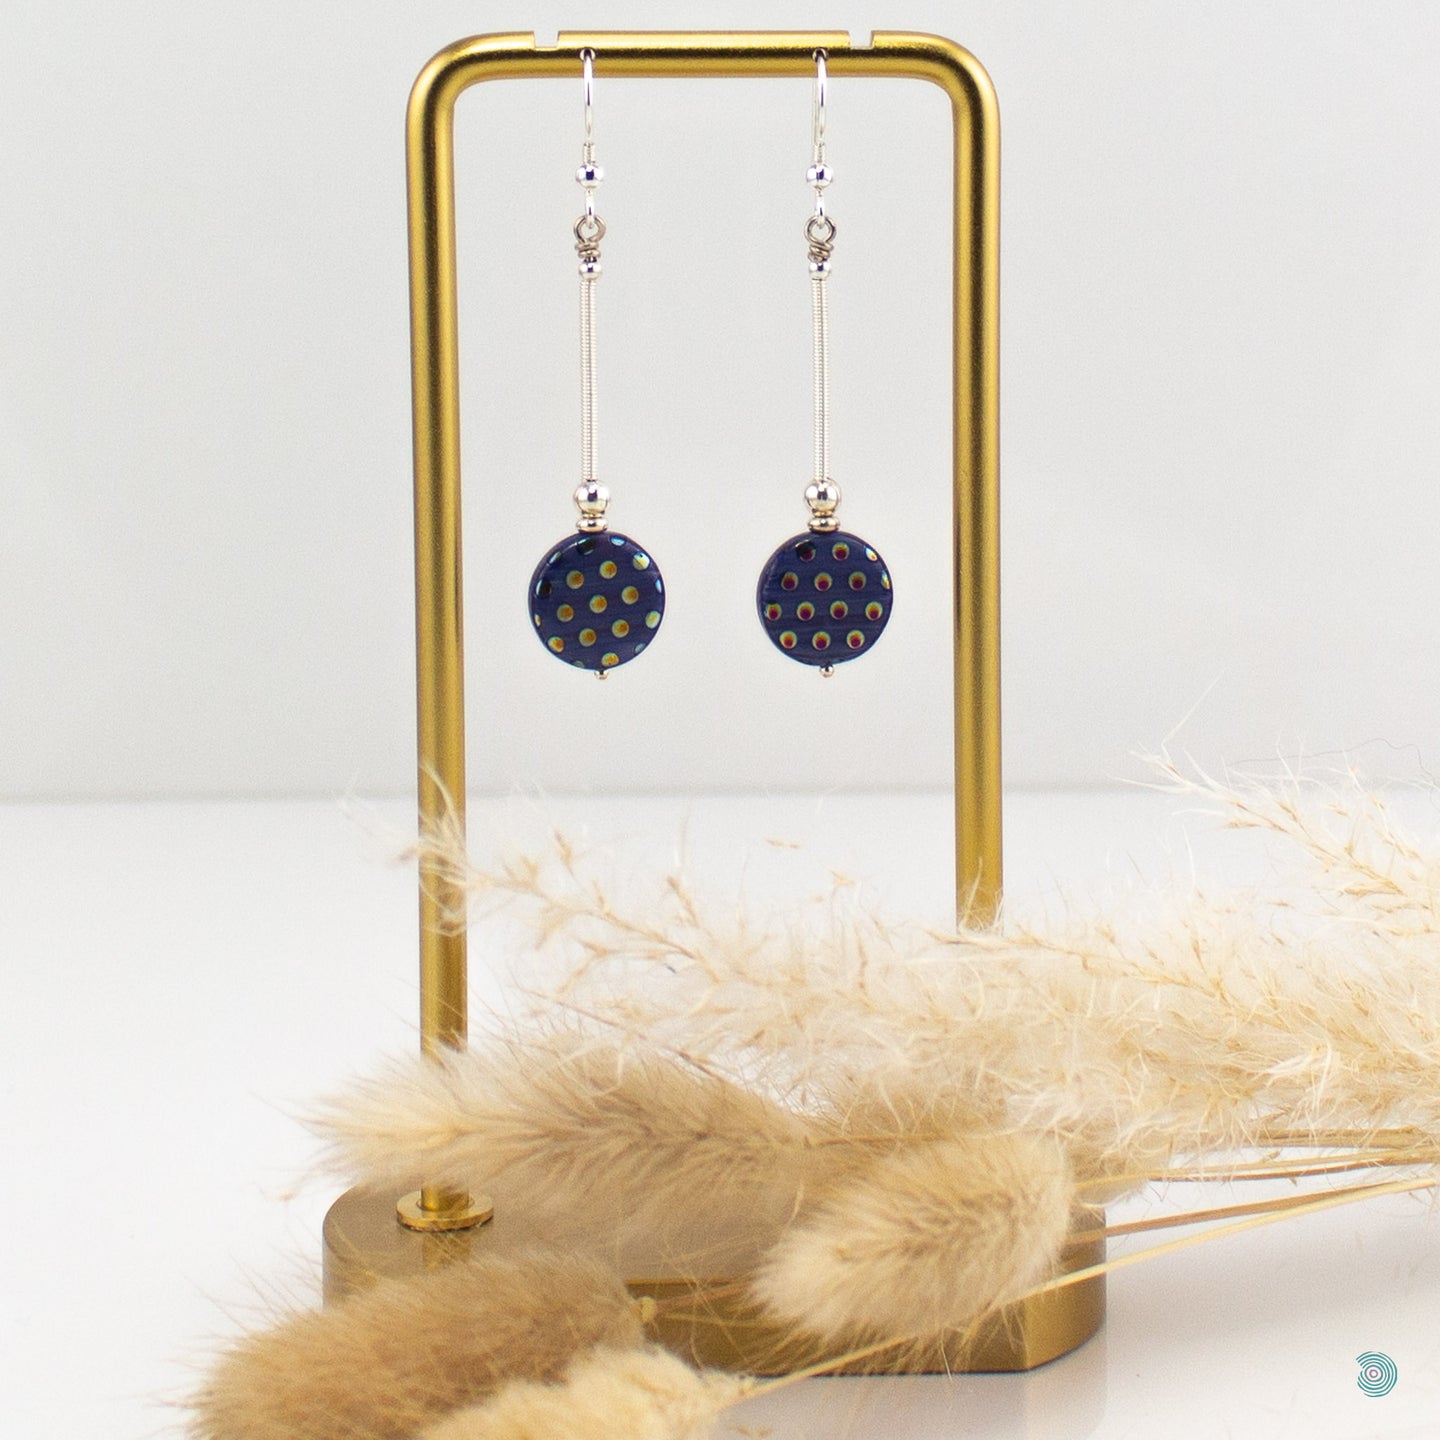 Spotted Czech glass drop earrings with hand wrapped silver filled long tubes and sterling silver beads and ear wires. They are presented in a velvet gift pouch for safe keeping or making them perfect for gift giving. Designed and Handmade in Dingle